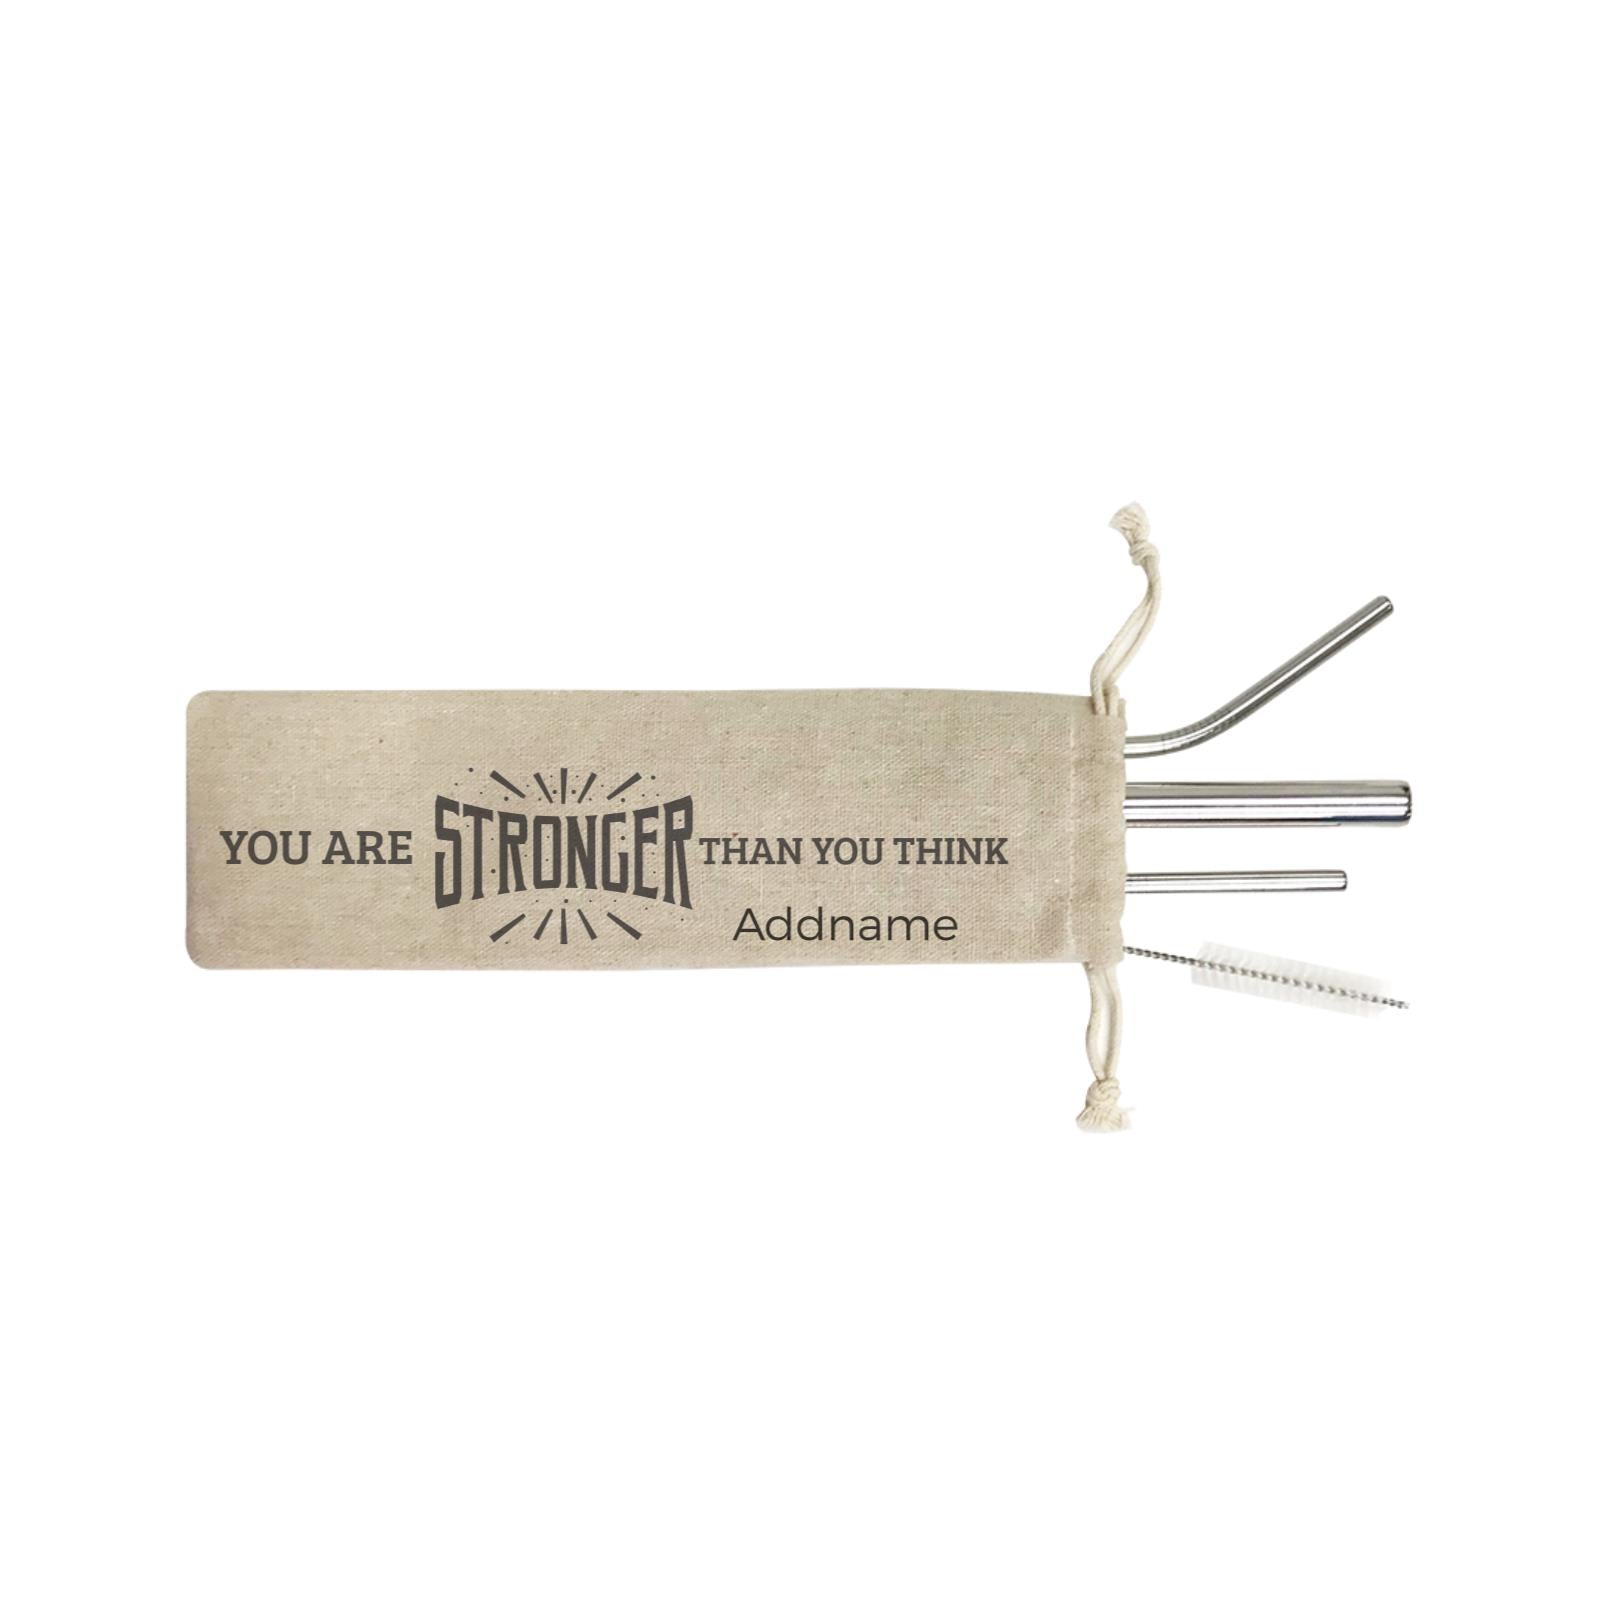 Inspiration Quotes You are Stronger Than You Think Addname SB 4-in-1 Stainless Steel Straw Set In a Satchel